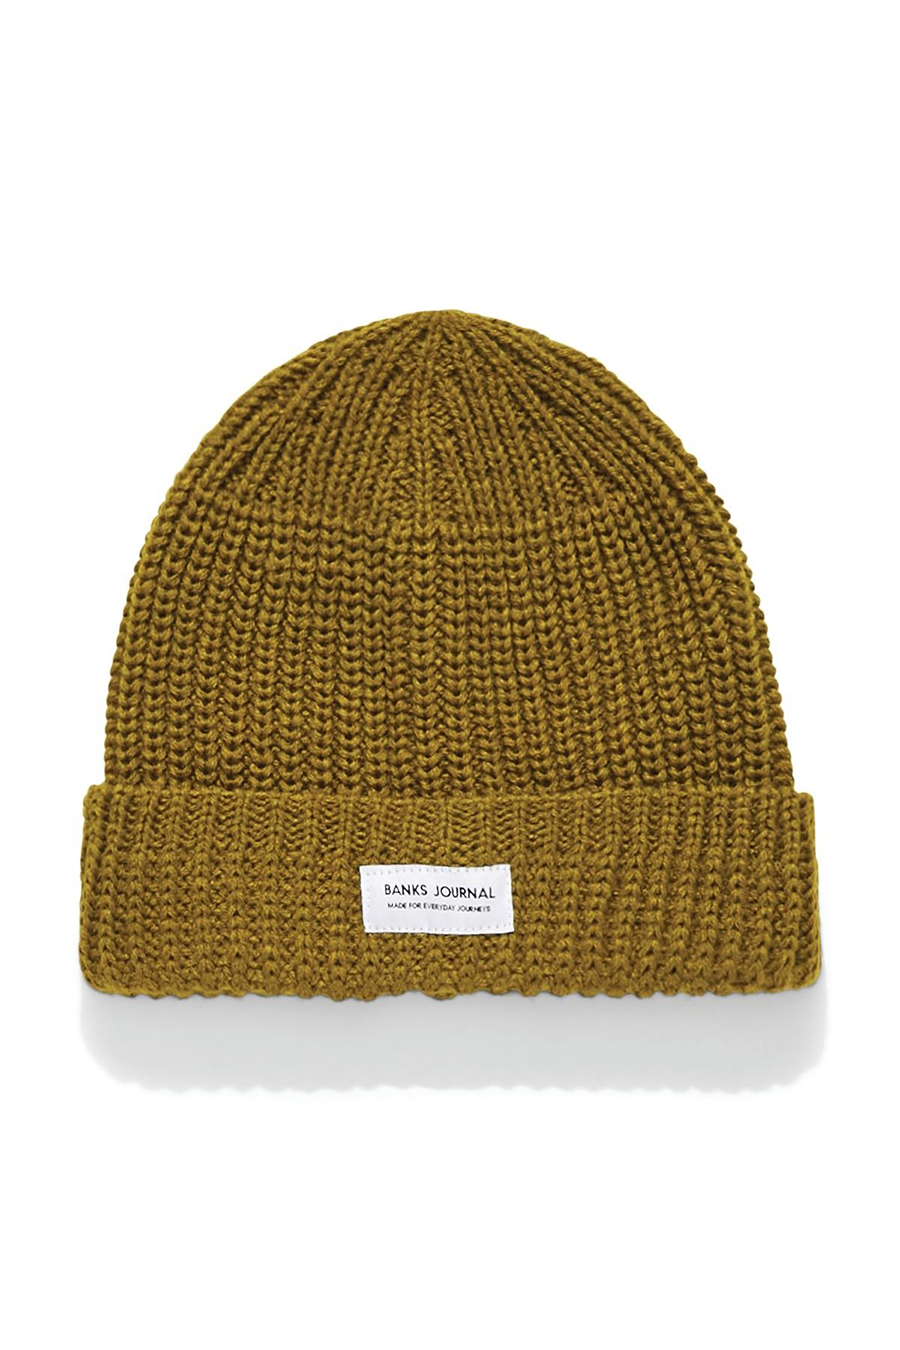 Made For Beanie | Cedar - Main Image Number 1 of 1